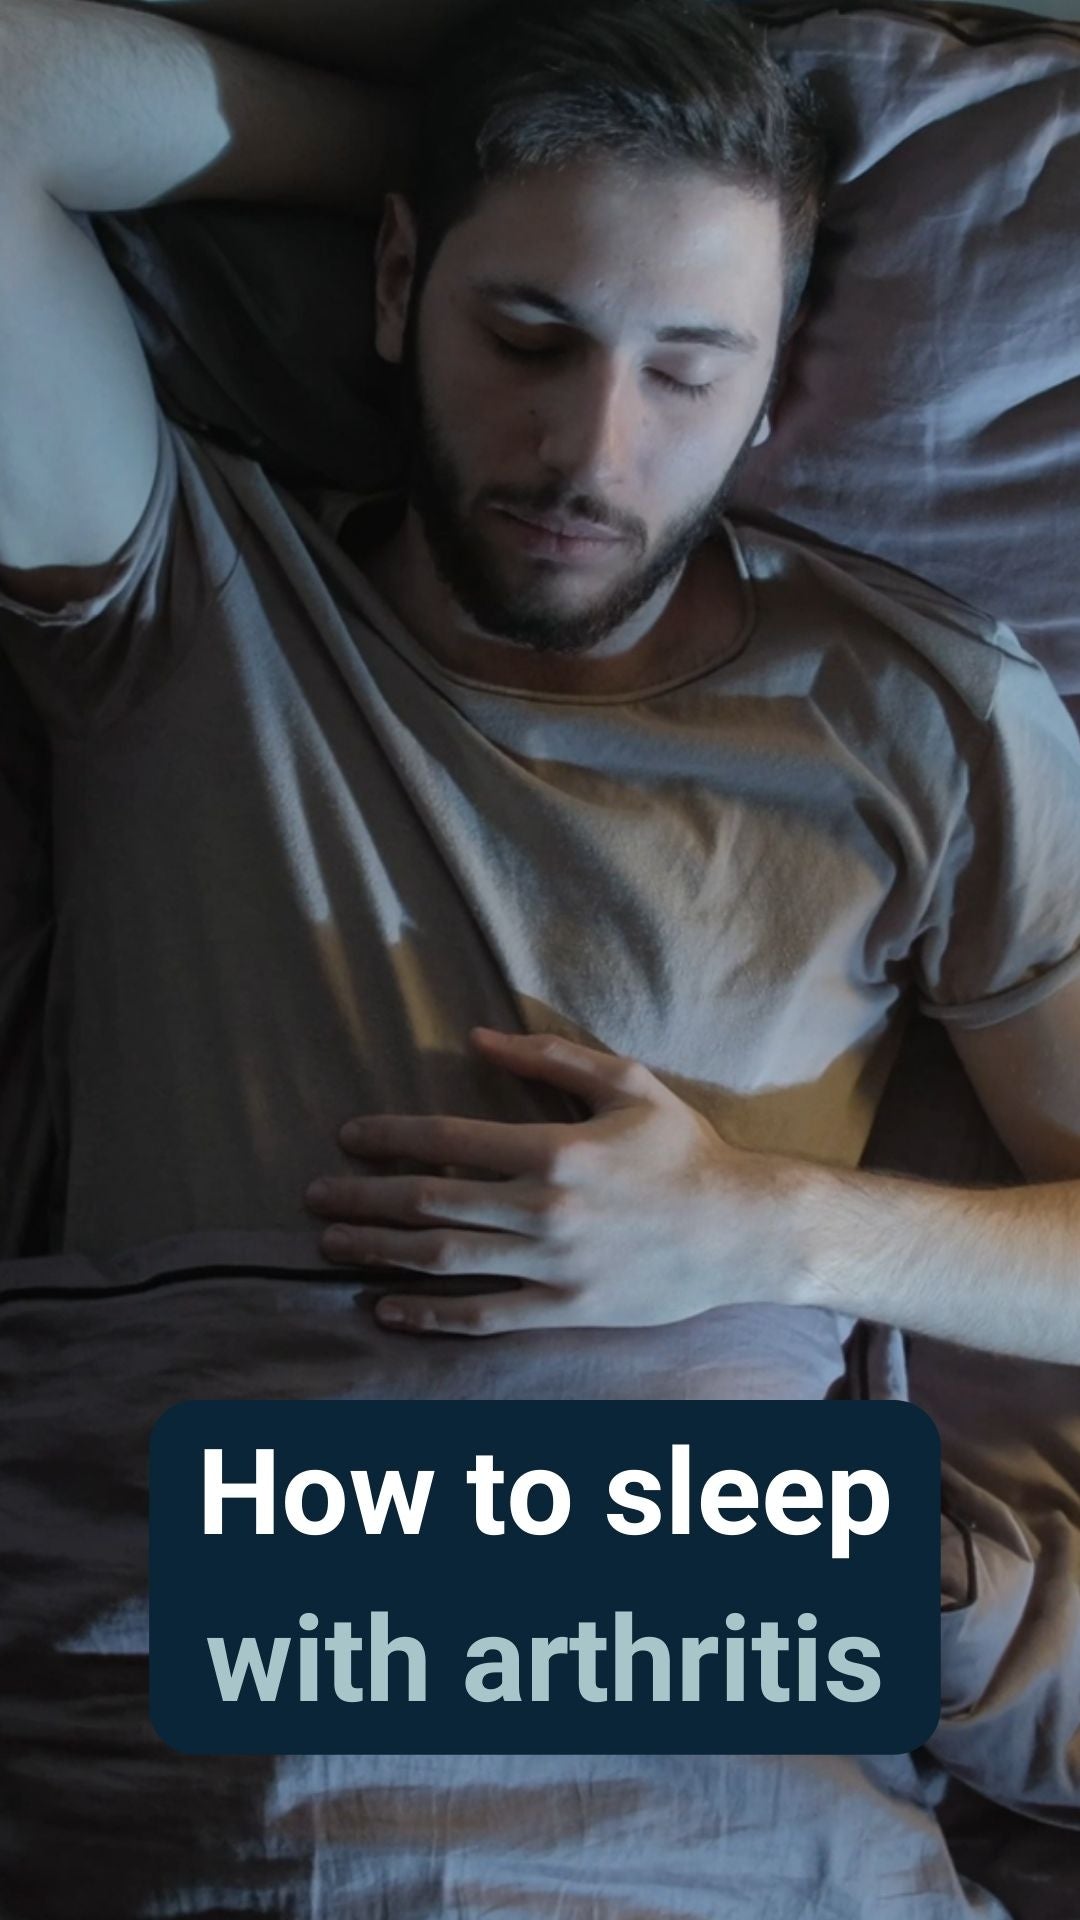 A man asleep in bed at night with the caption 'How to sleep with arthritis'